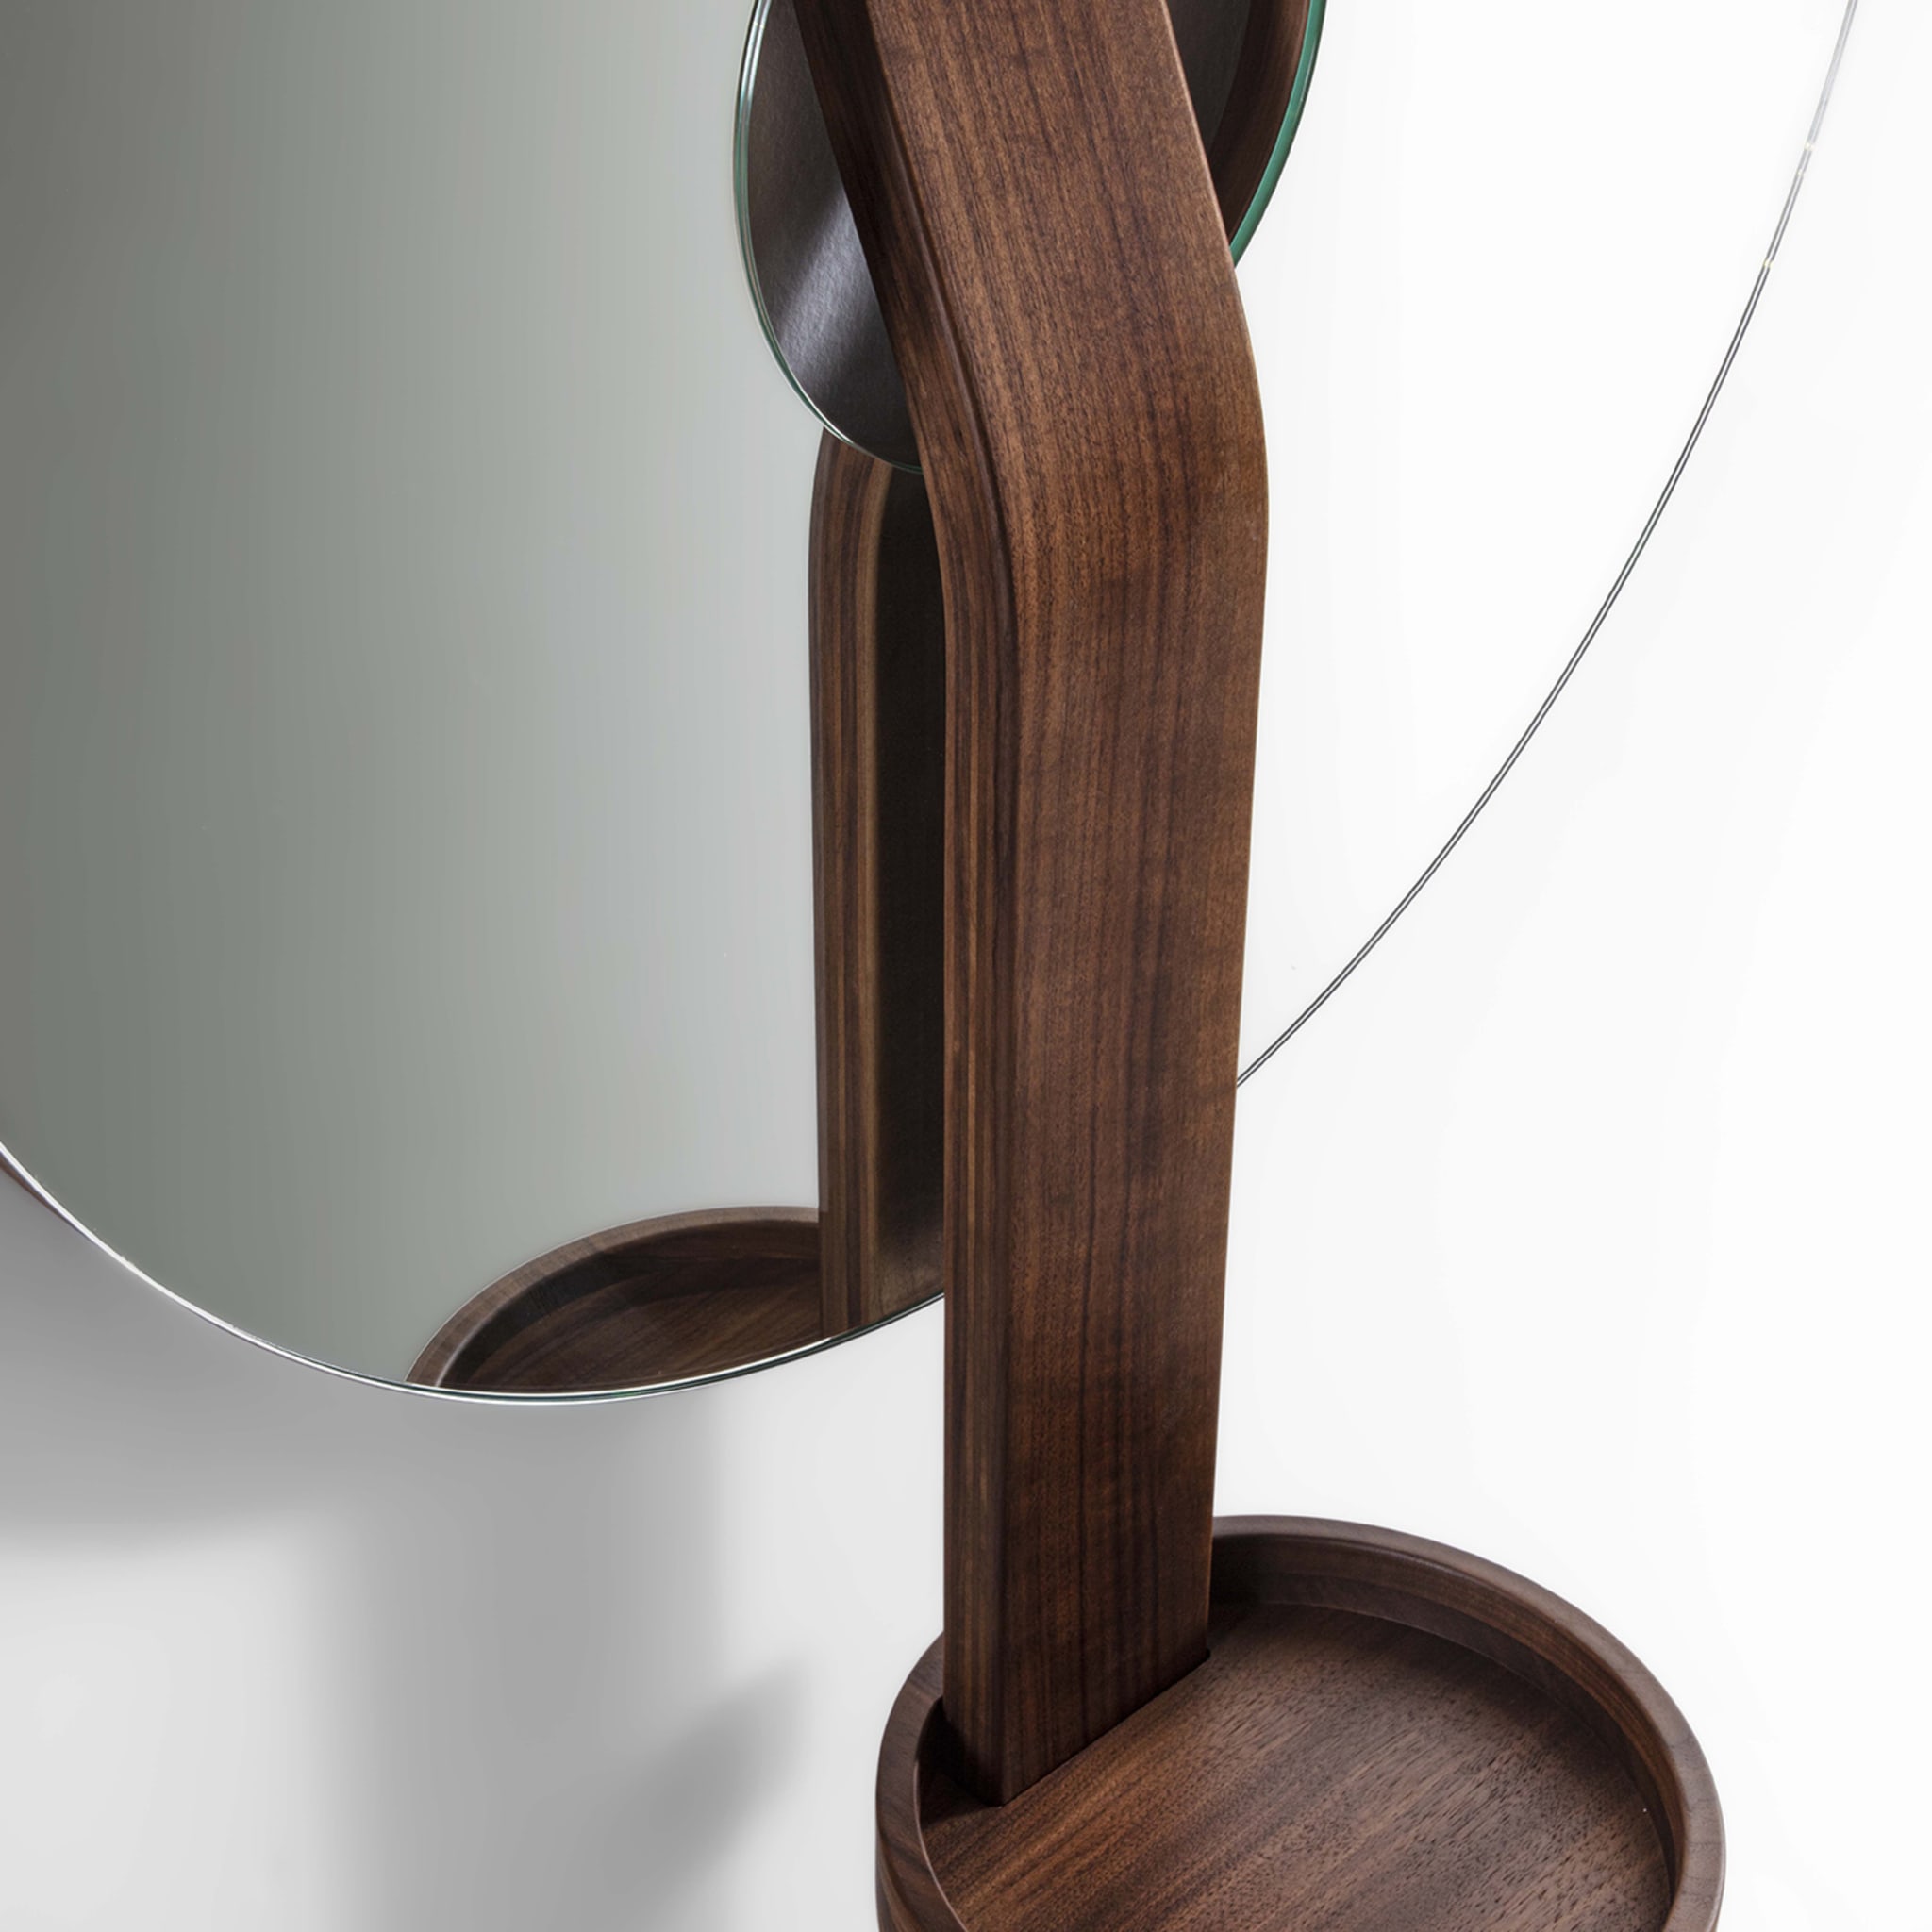 Irpin Disk-Shaped Brown Wall Mirror - Alternative view 4